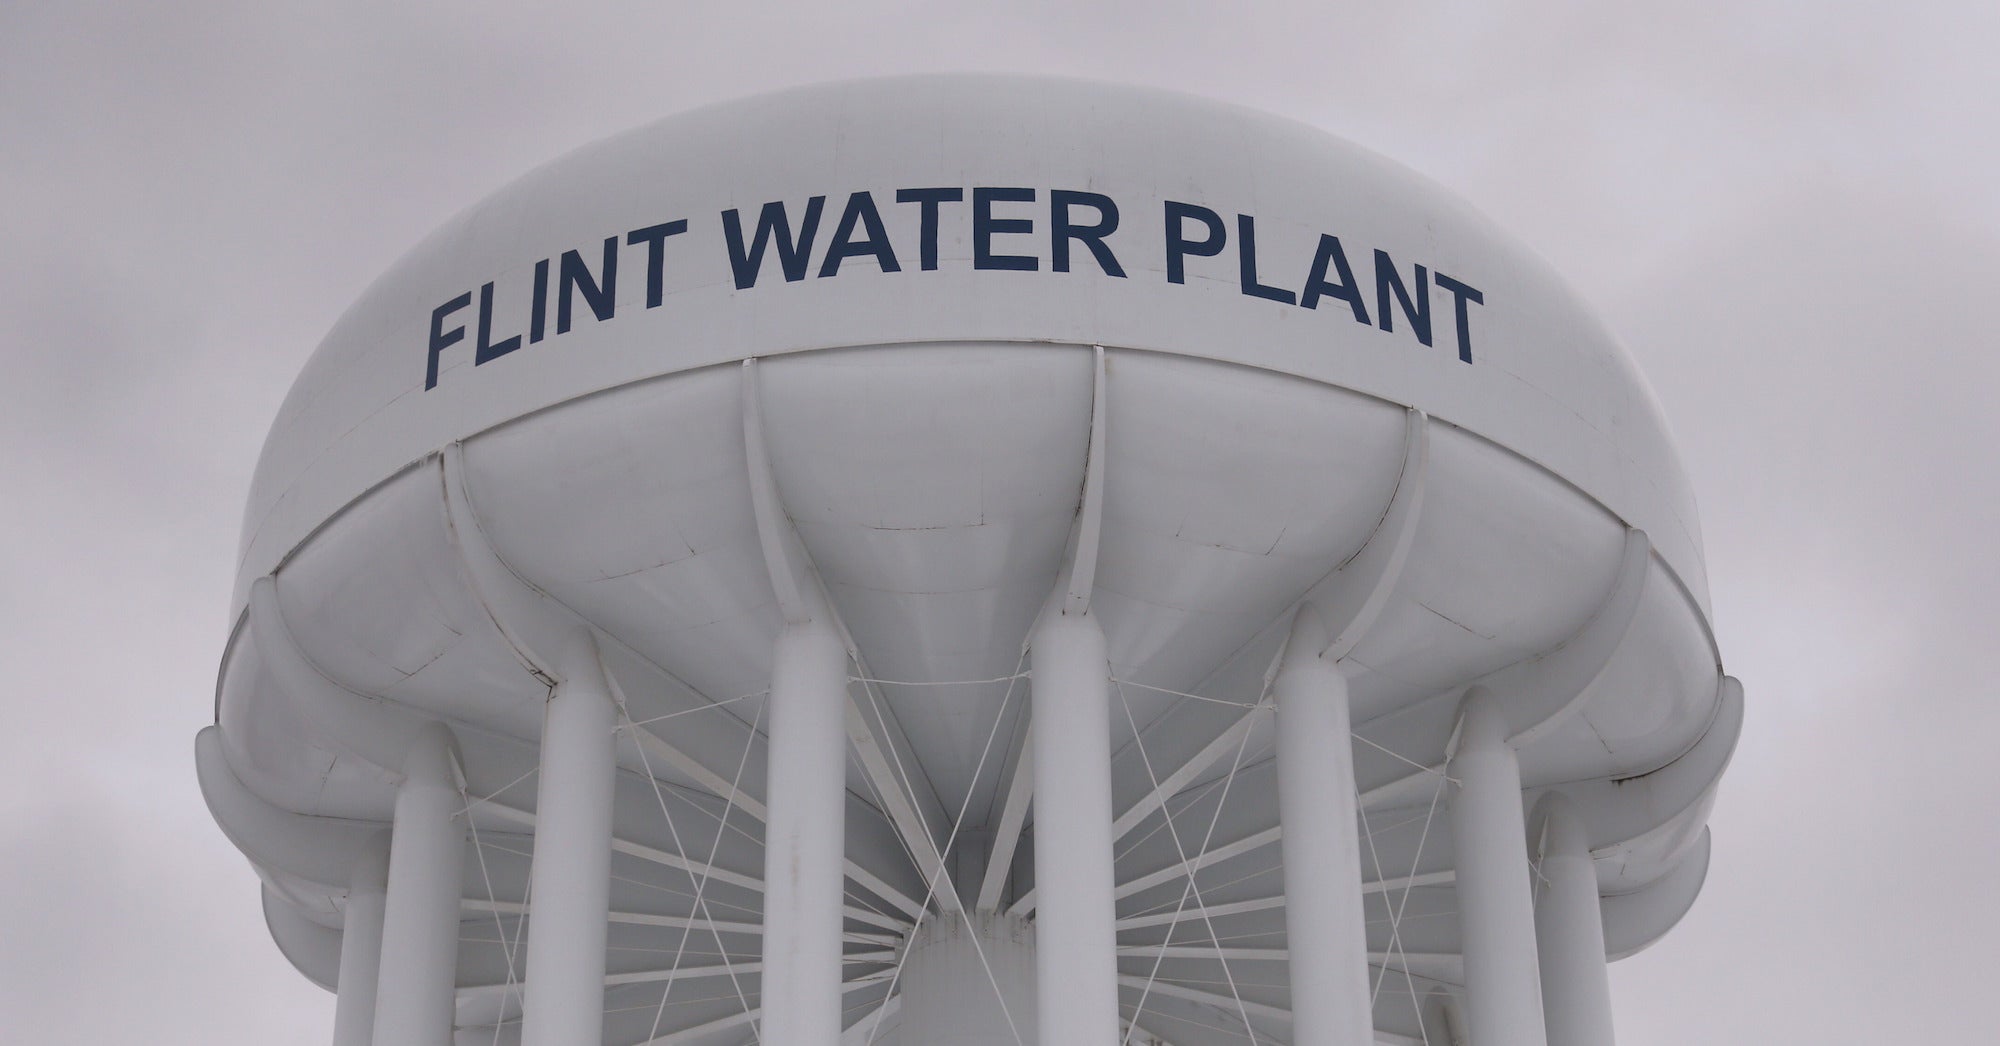 Officials in Flint are facing charges of involuntary manslaughter over the water crisis there